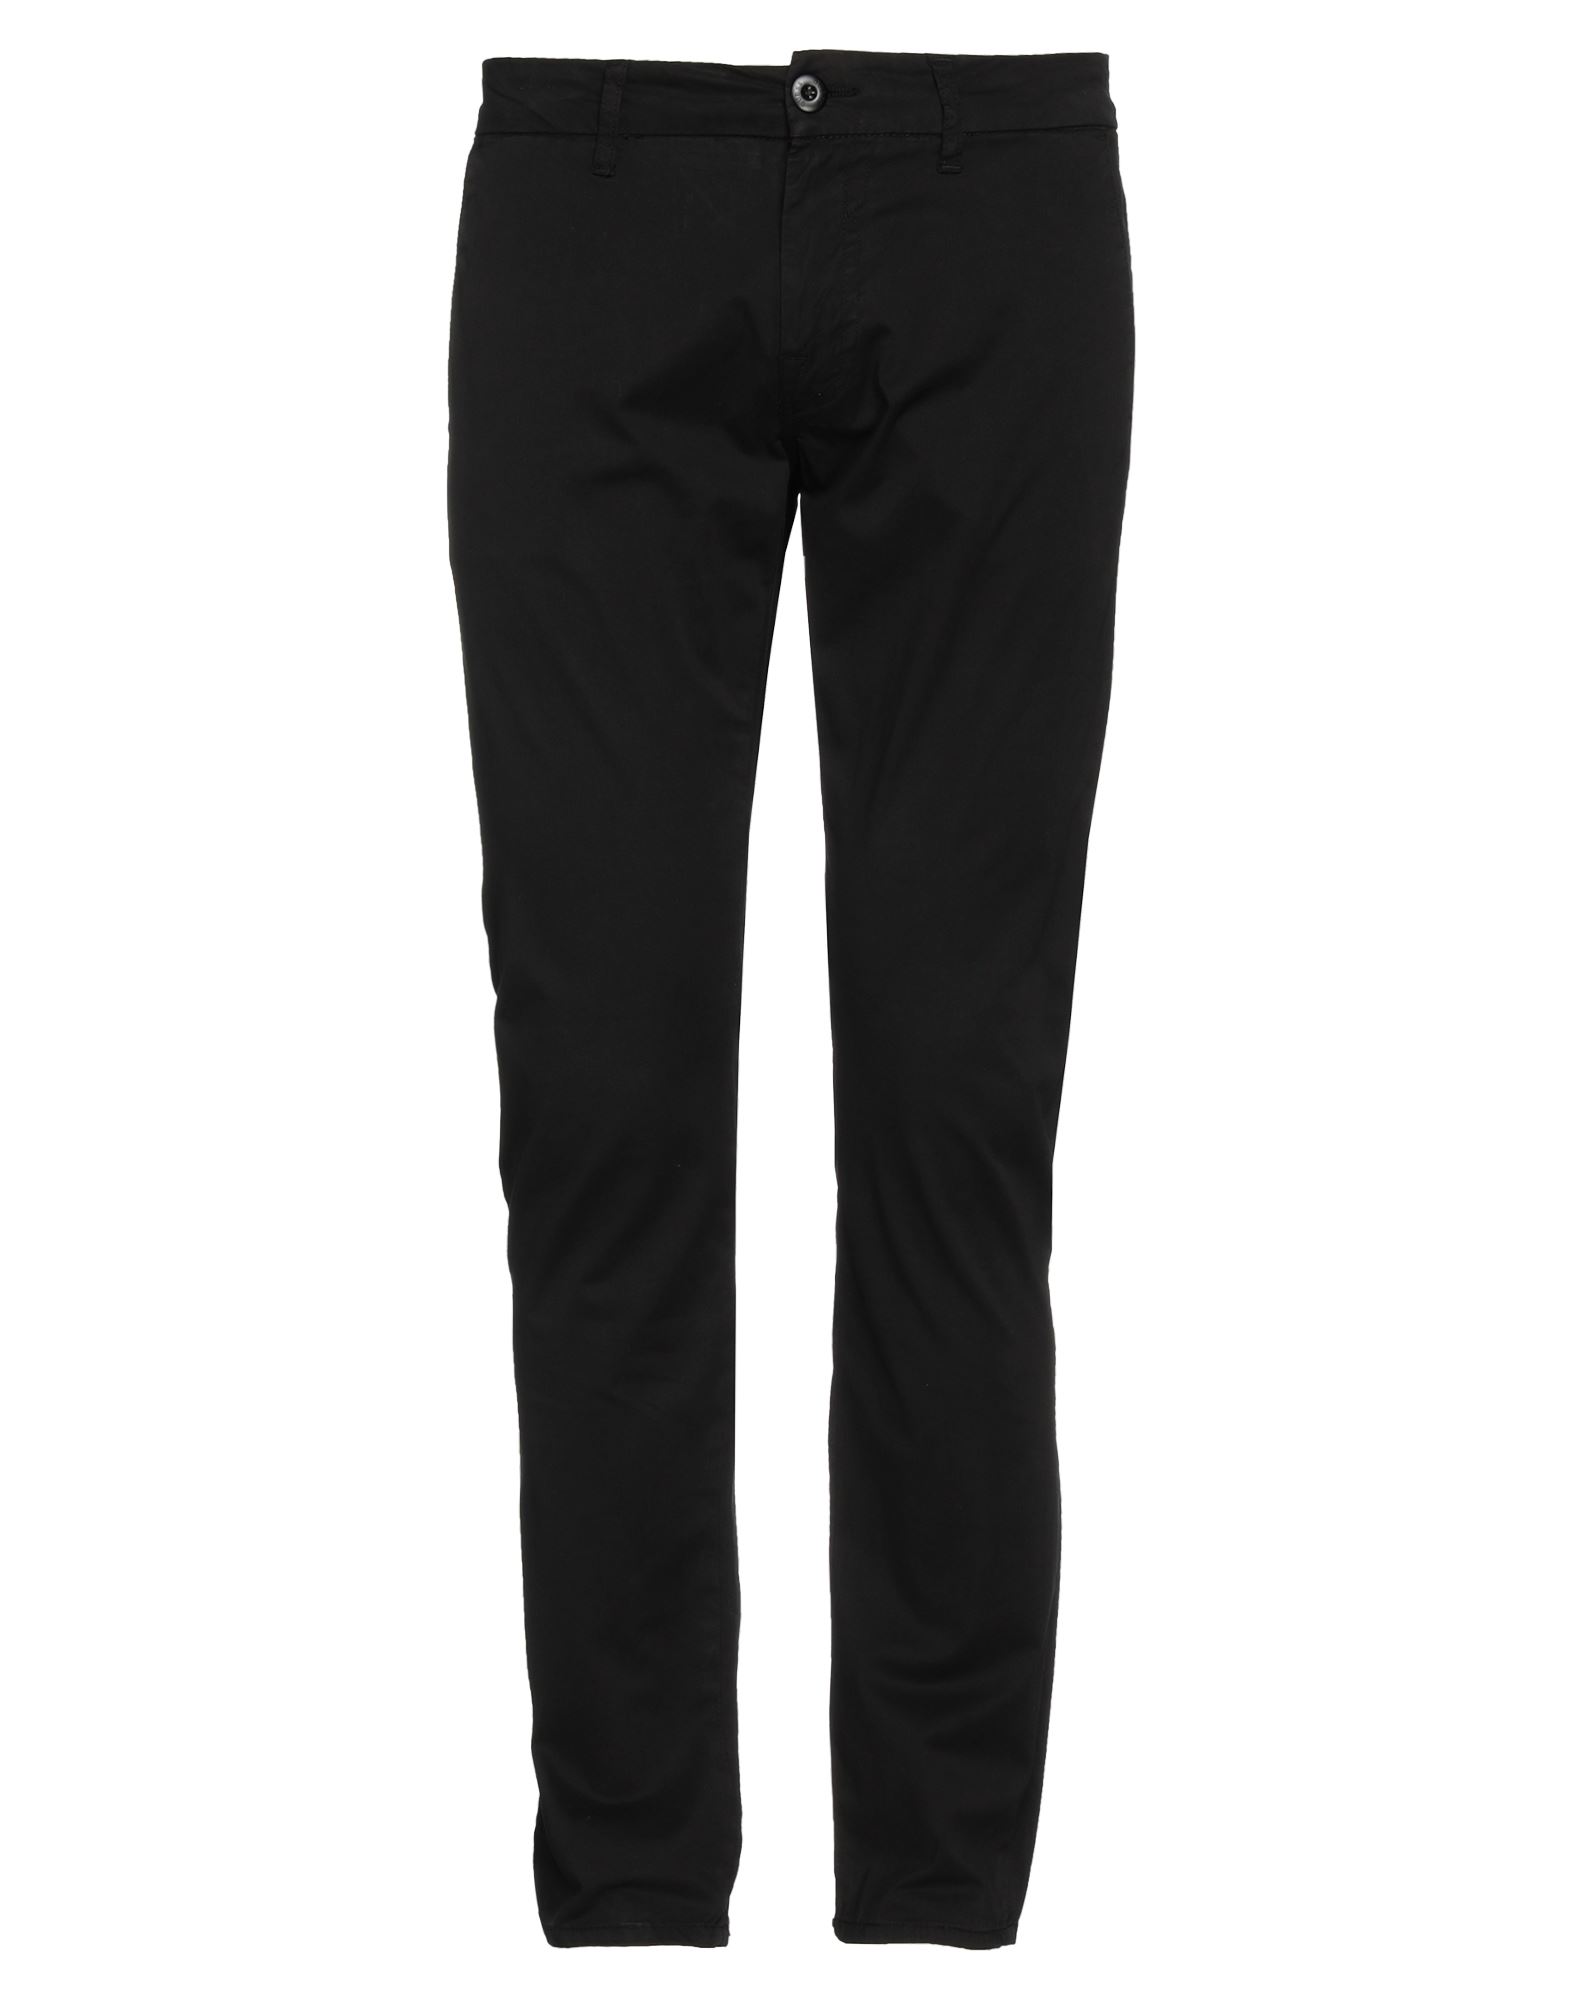 Guess Pants In Black